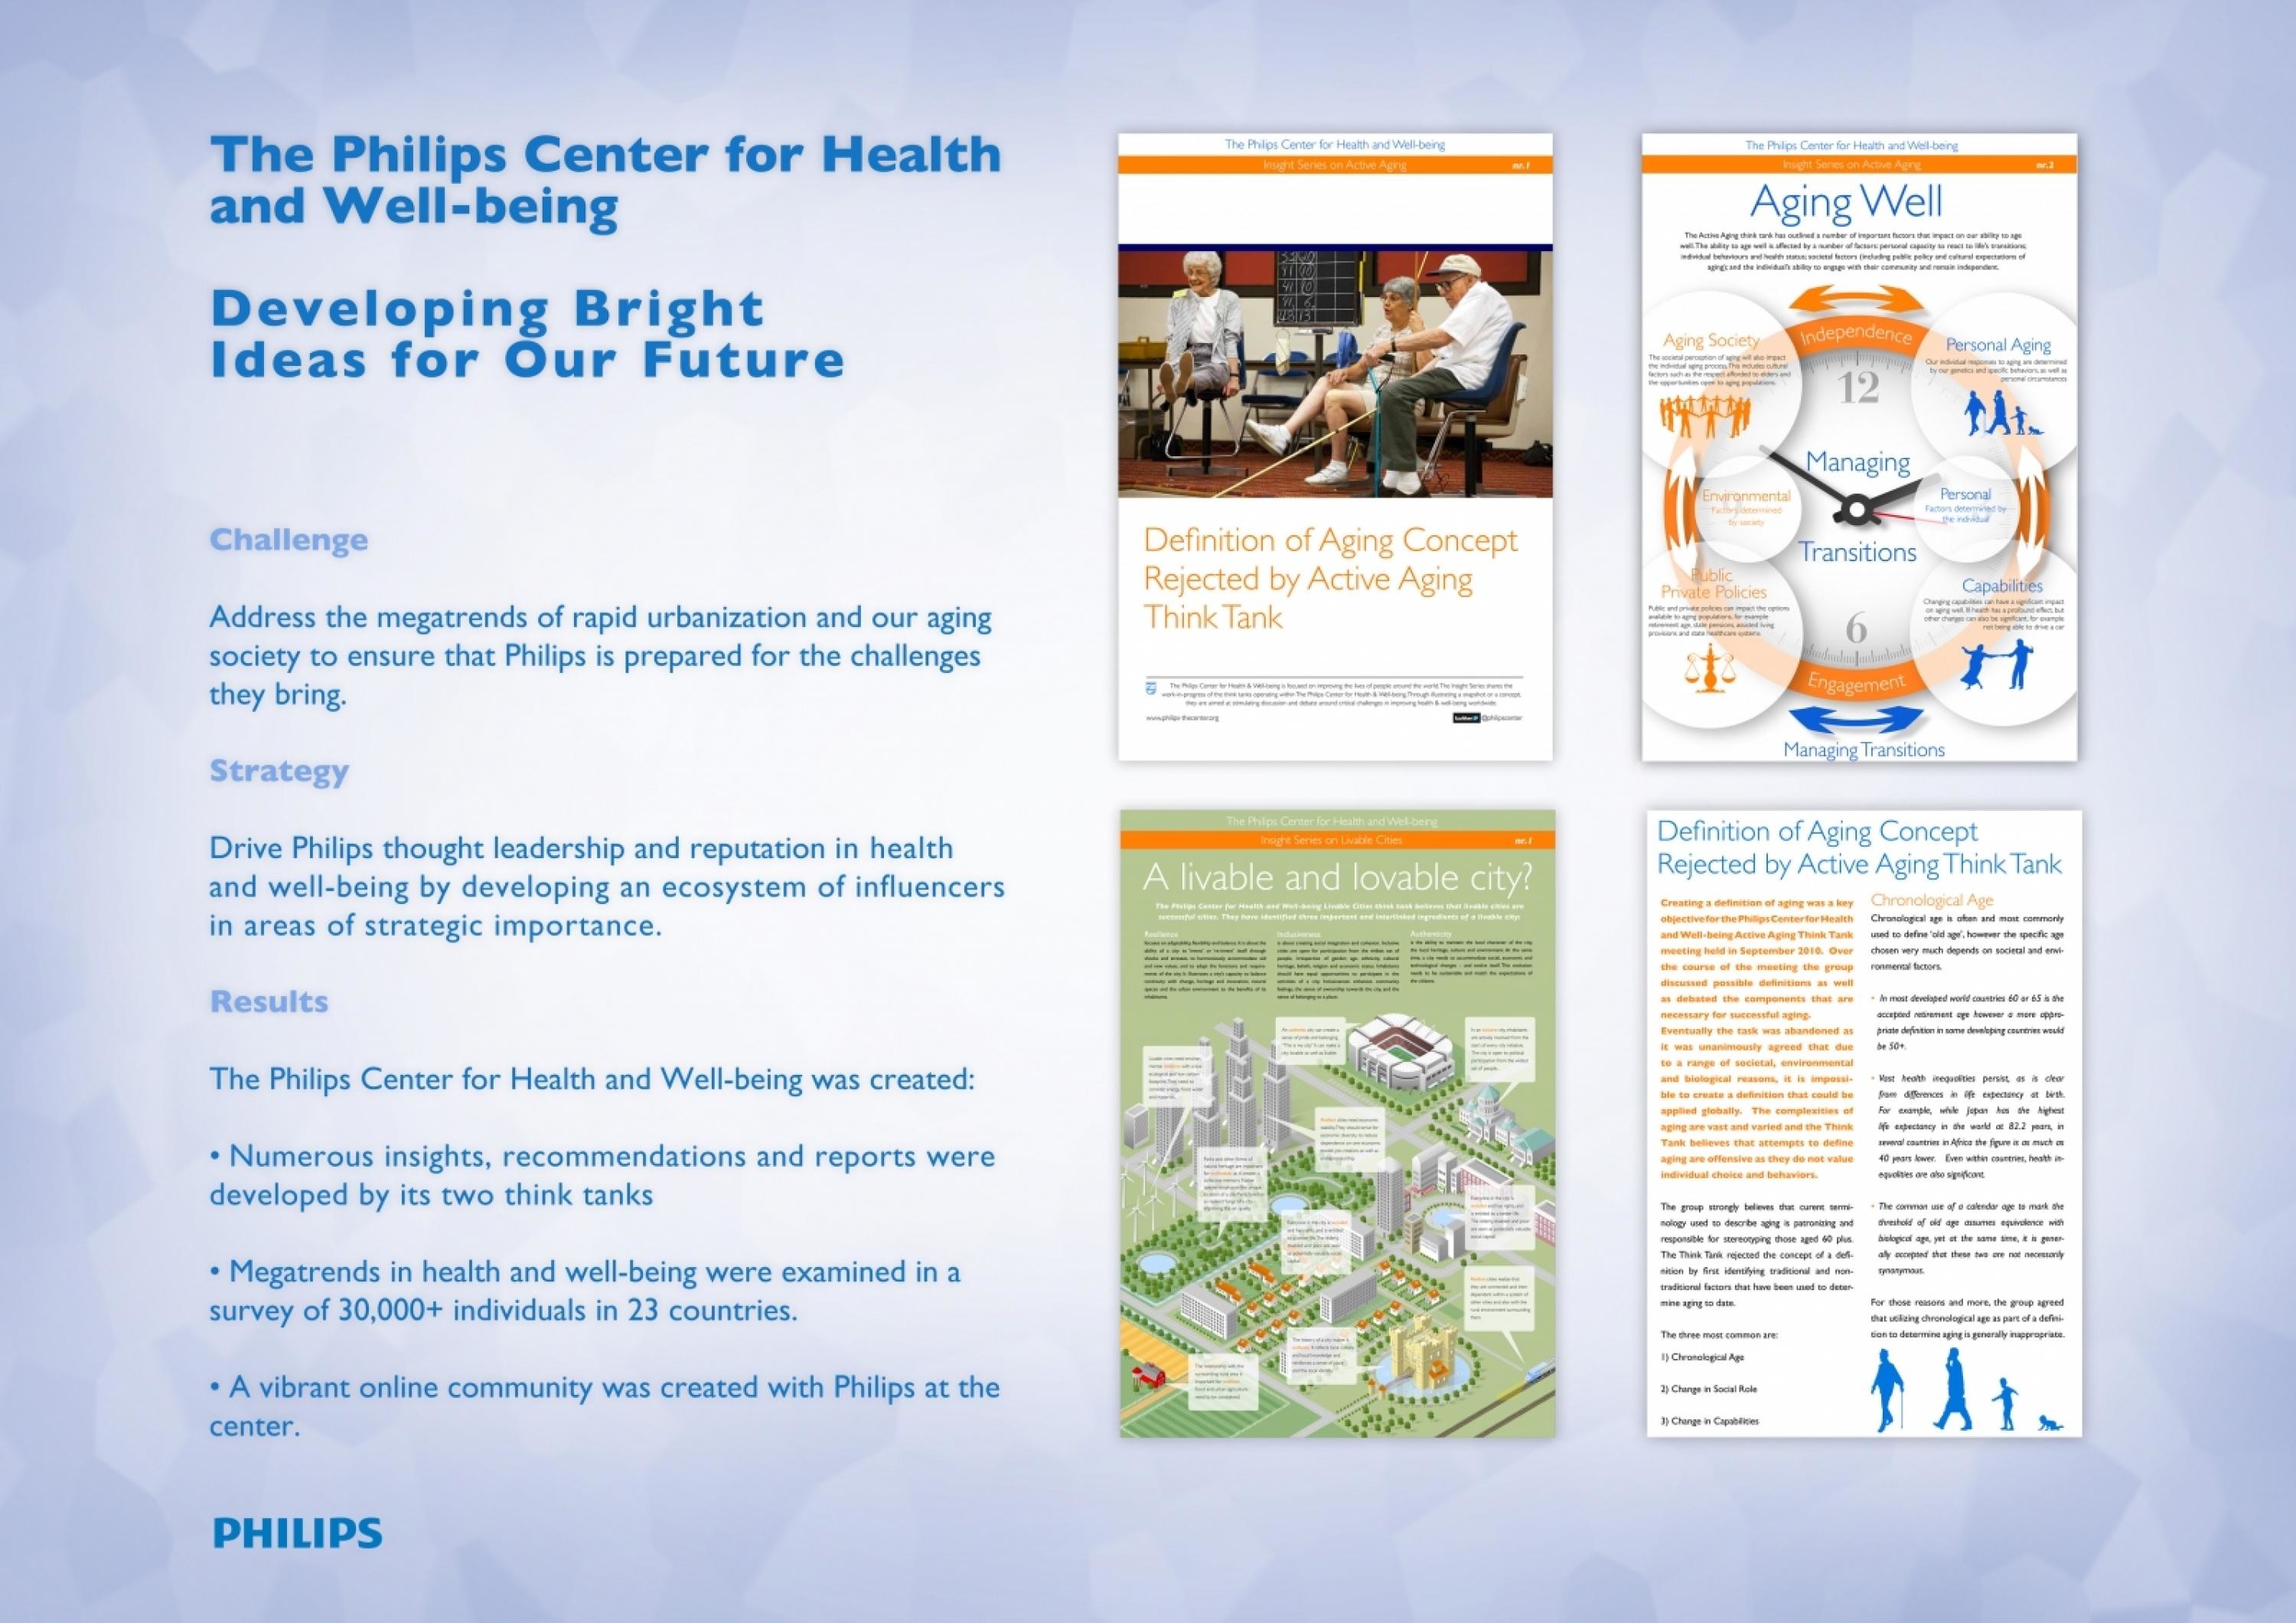 THE PHILIPS CENTER FOR HEALTH AND WELL-BEING